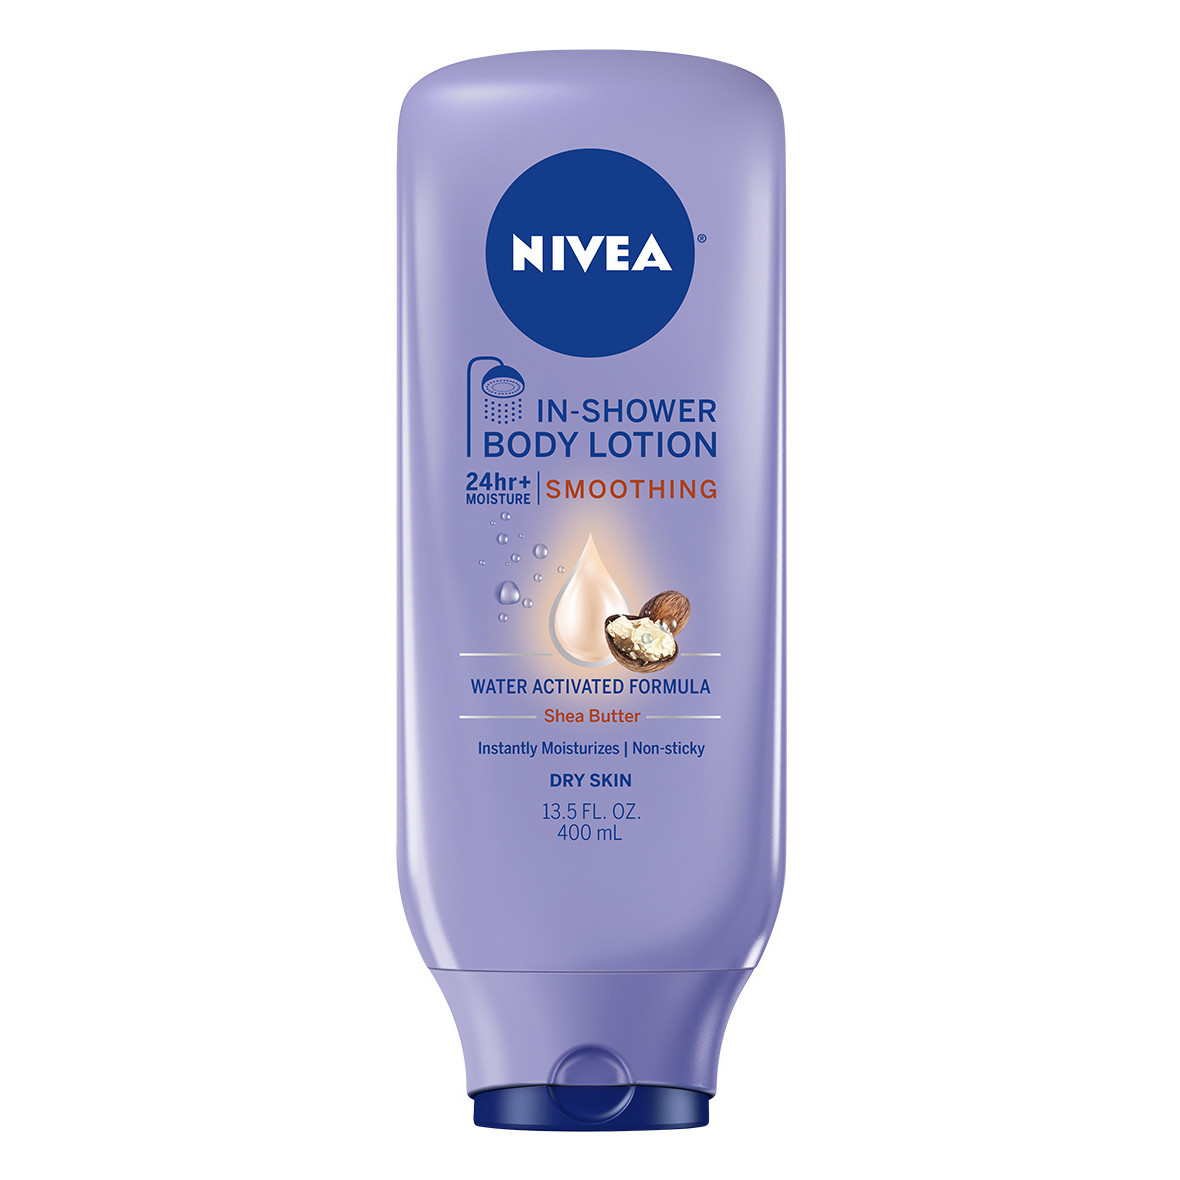 NIVEA In-Shower Smoothing Body Lotion 13.5 fl. oz. - image 1 of 3